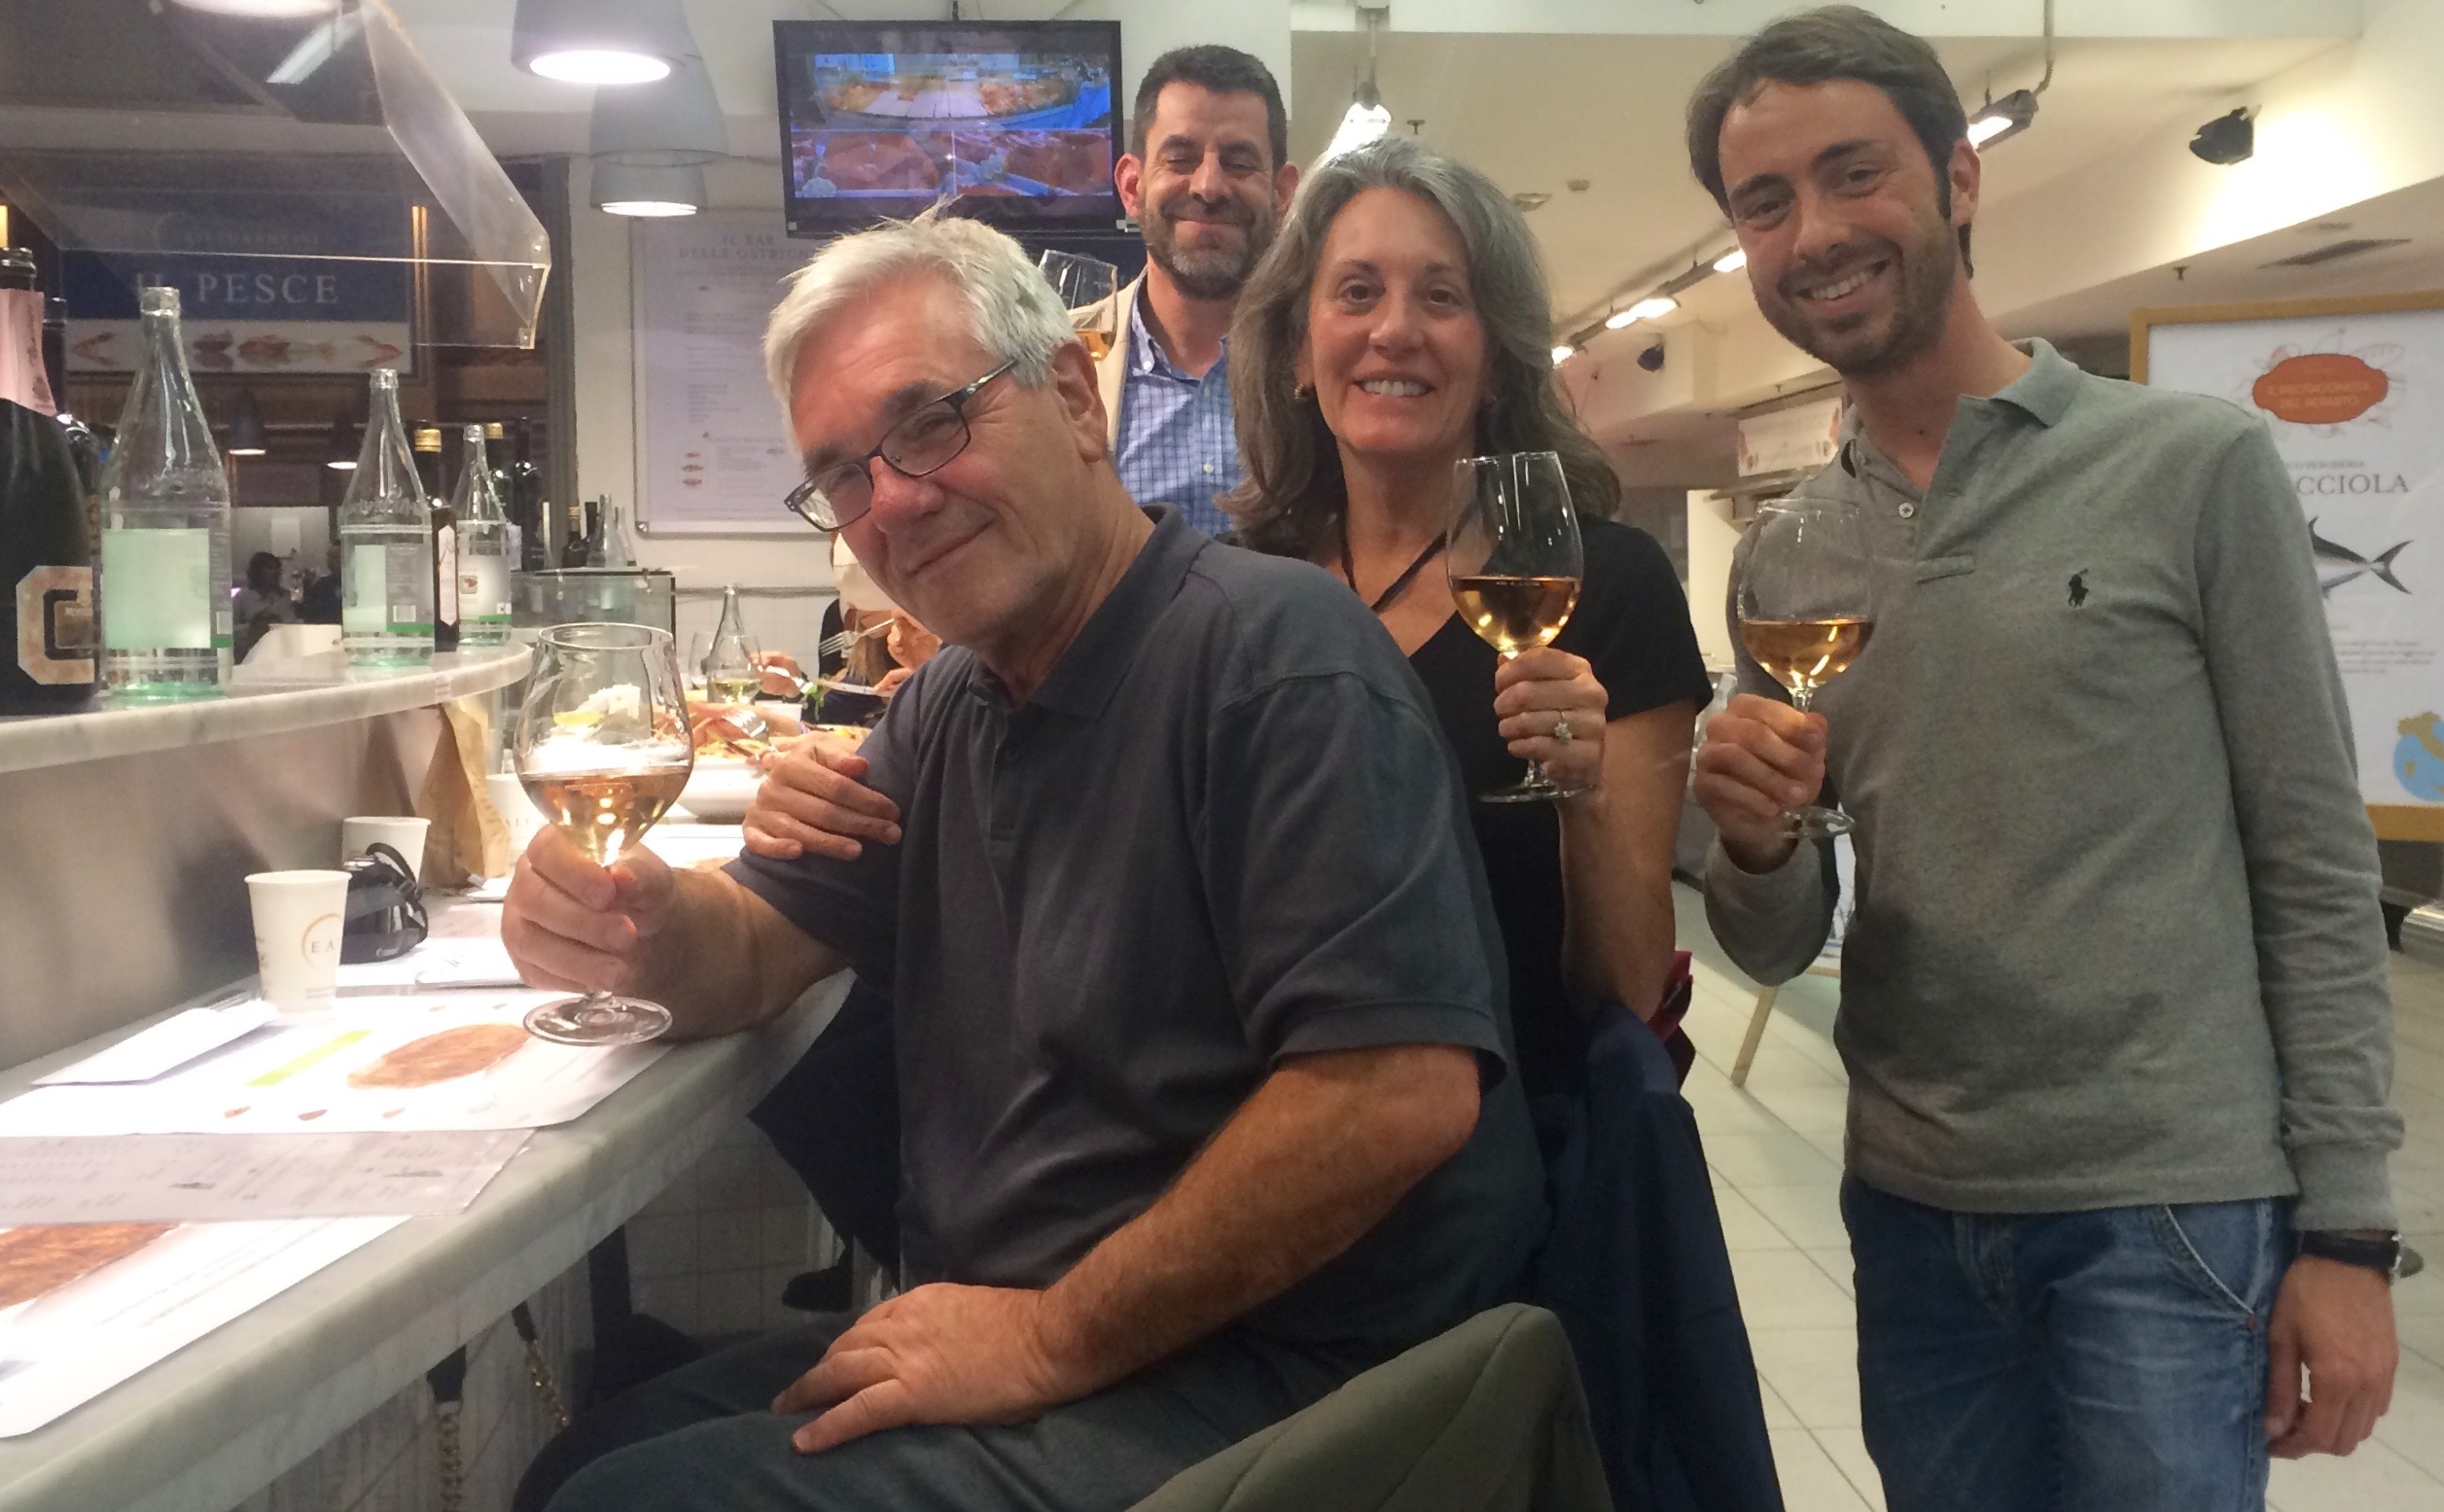 Toasting Torino! Michel Thibault (Michel Thibault Wine), Claudio Negrino (Director, Cantina Alice Bel Colle), Marla Norman (Publisher, Travel Curious Often), Daniele Bianco (Export Director, Cantina Alice Bel Colle)